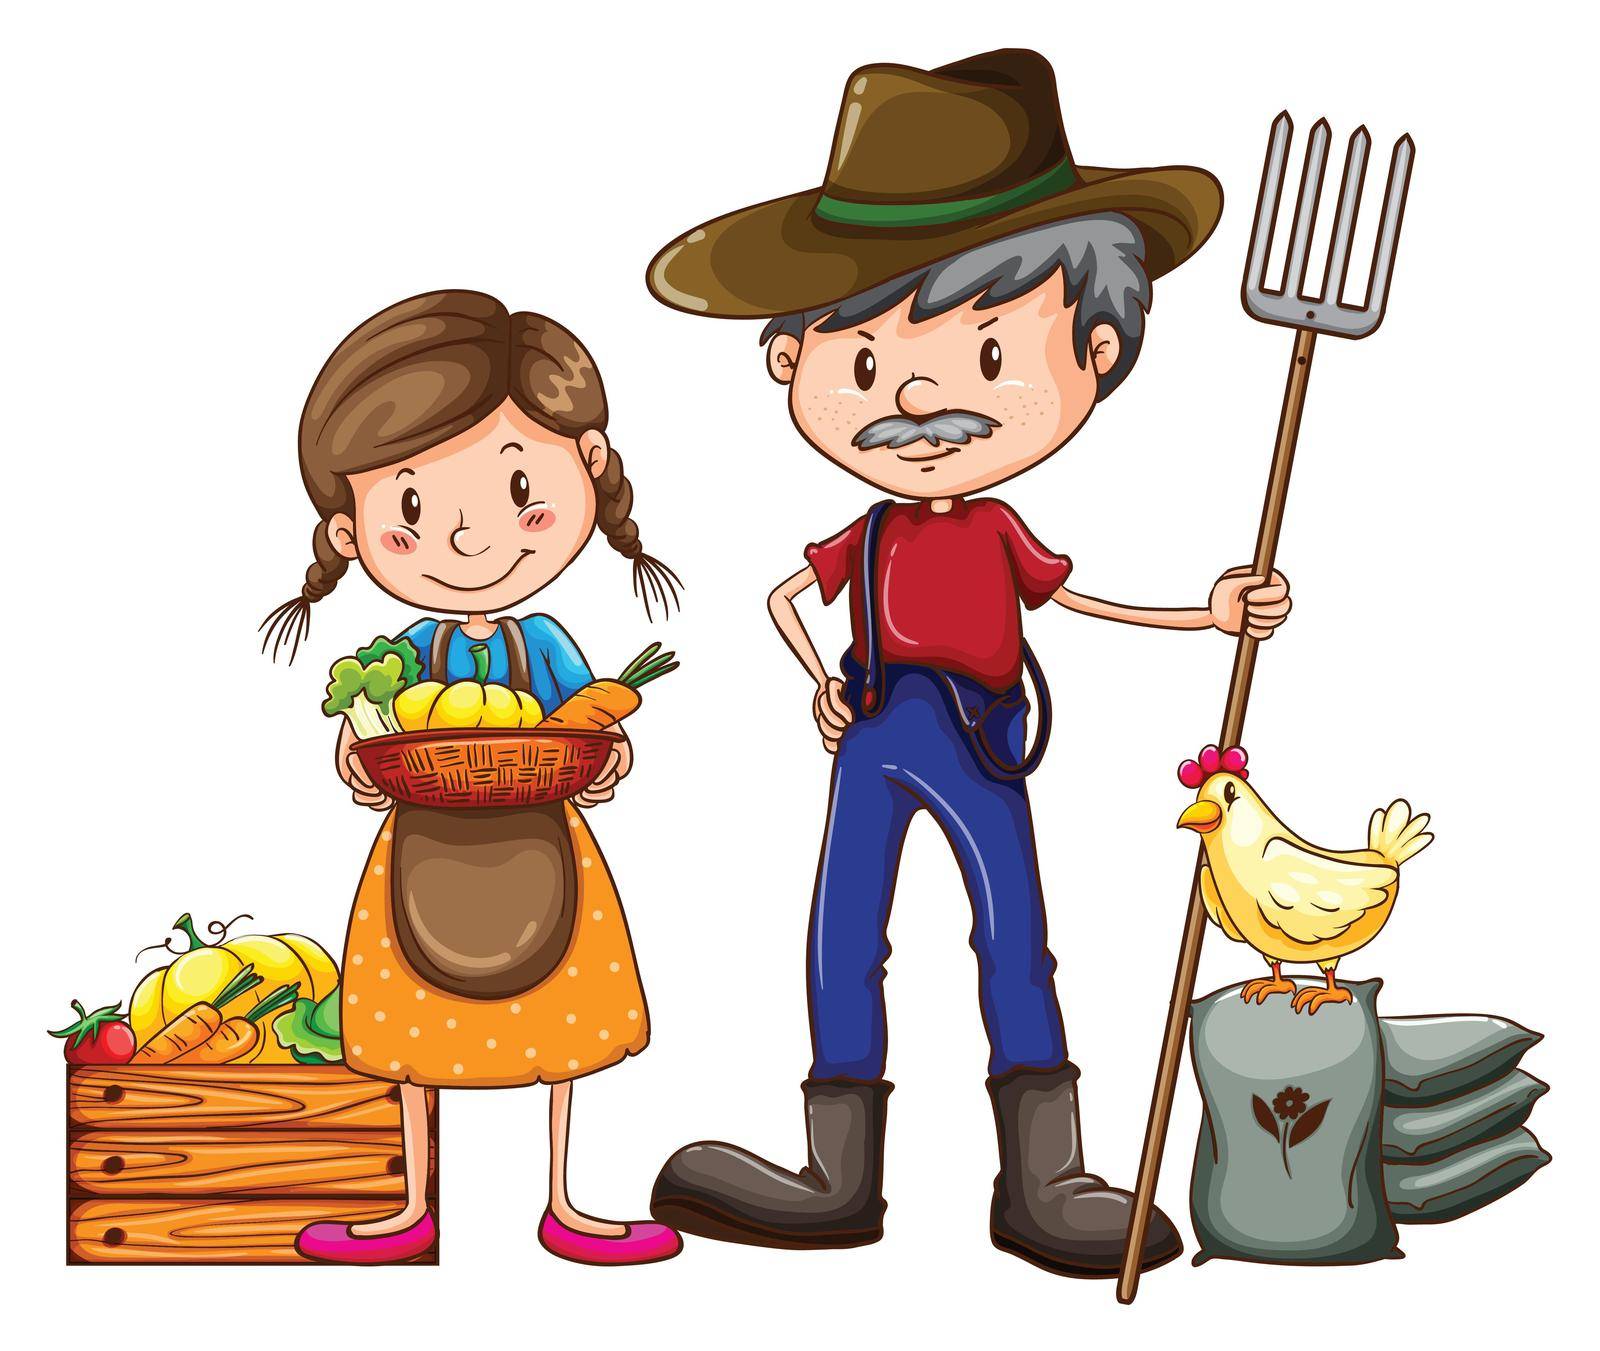 A farmer holding a rake and a vendor with a basket of vegetables on a white background